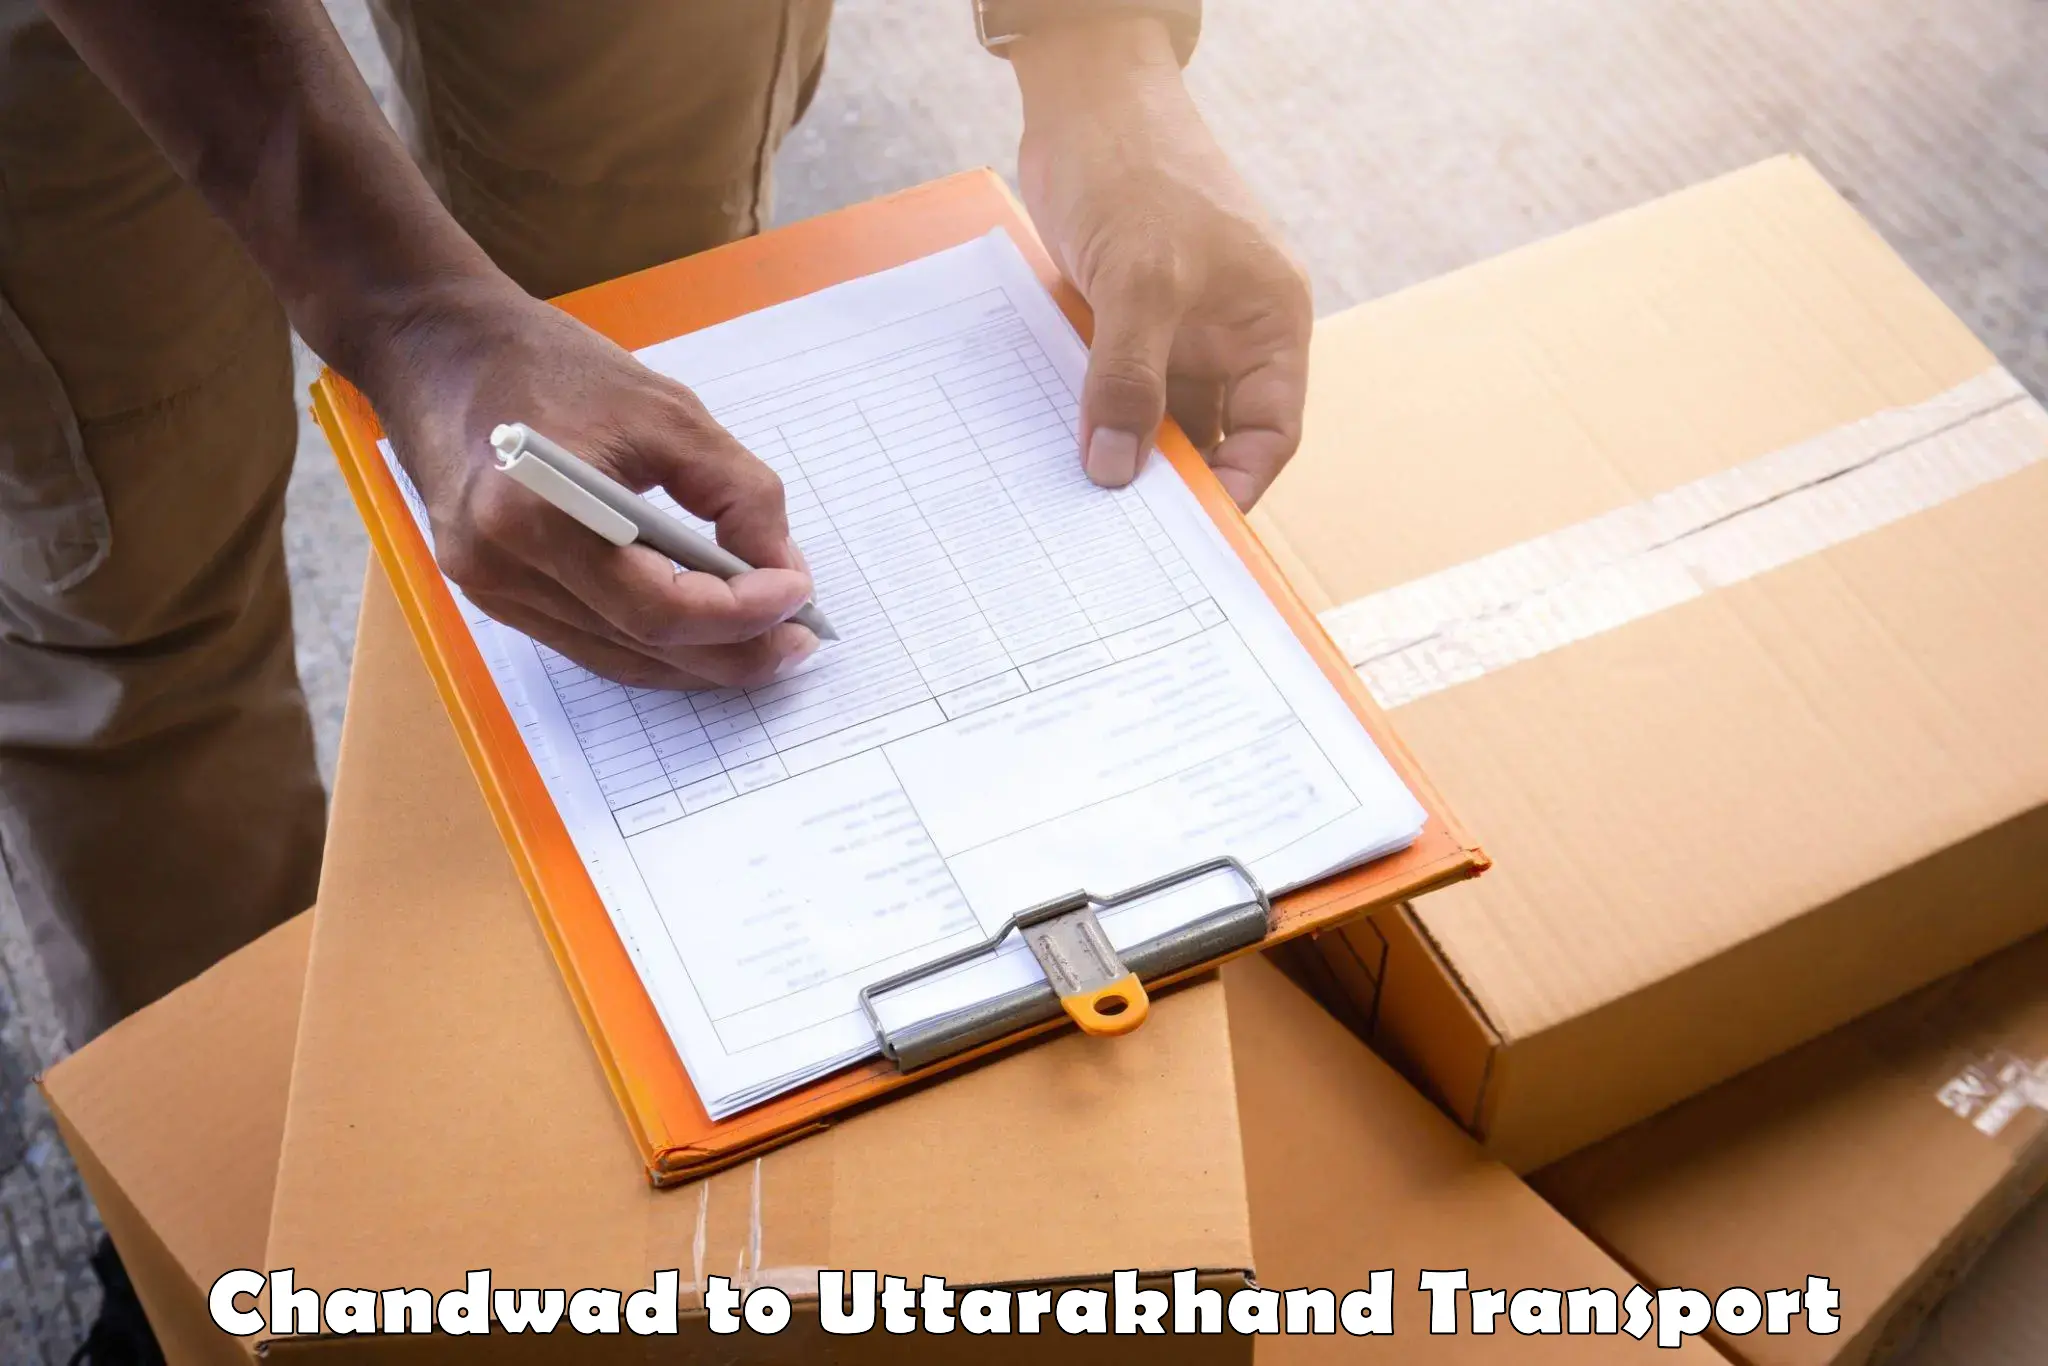 Express transport services Chandwad to Rudrapur